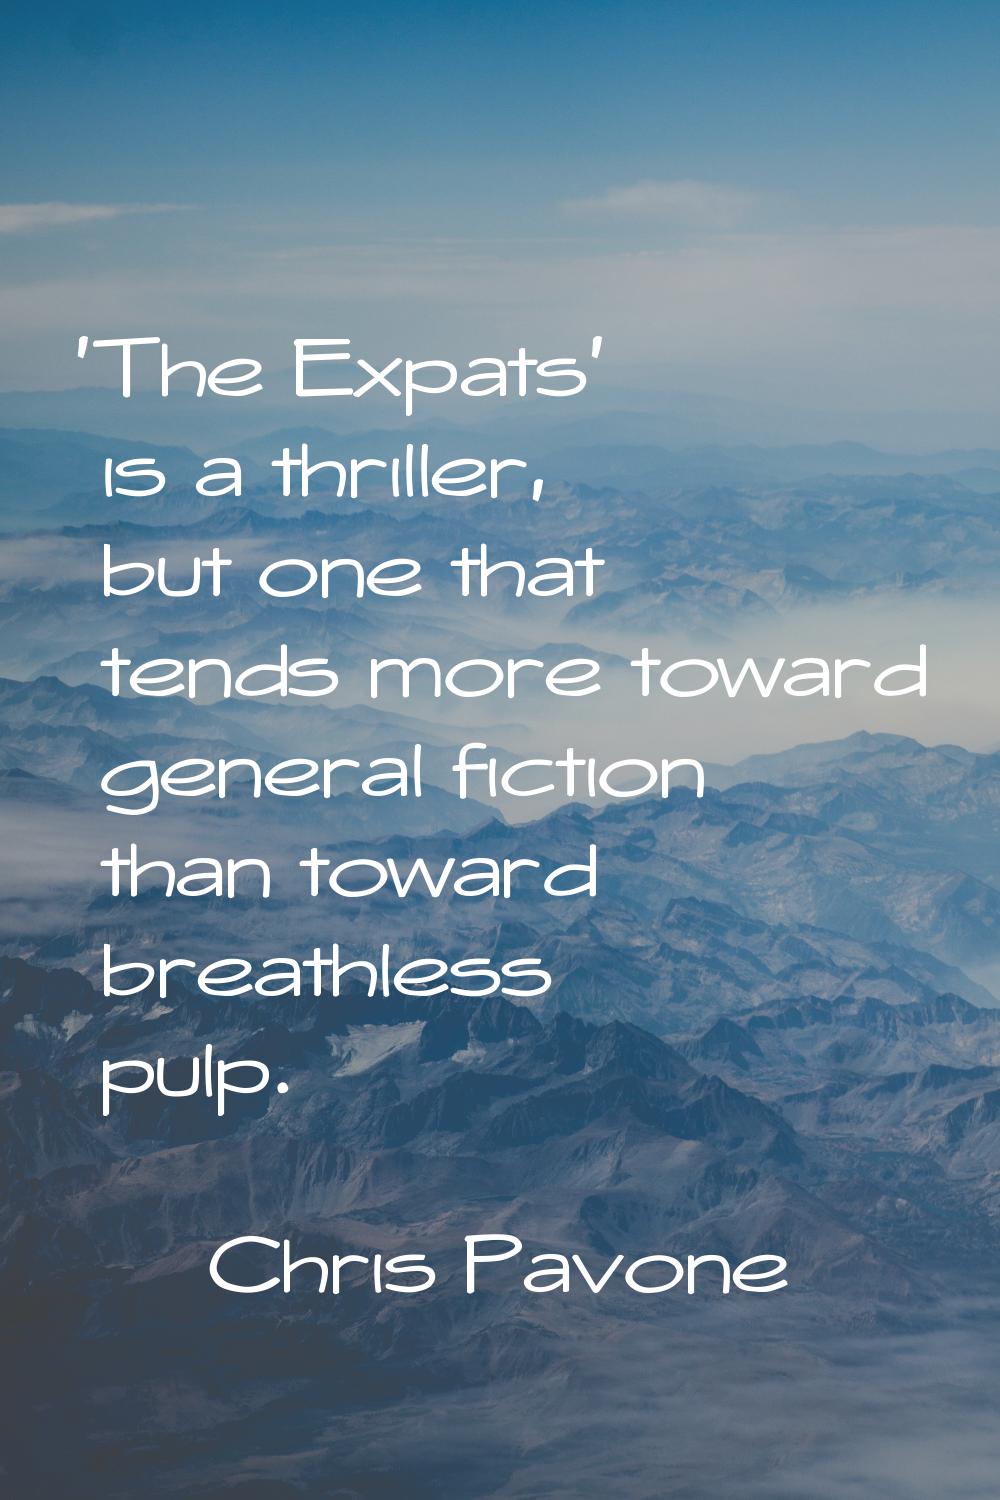 'The Expats' is a thriller, but one that tends more toward general fiction than toward breathless p